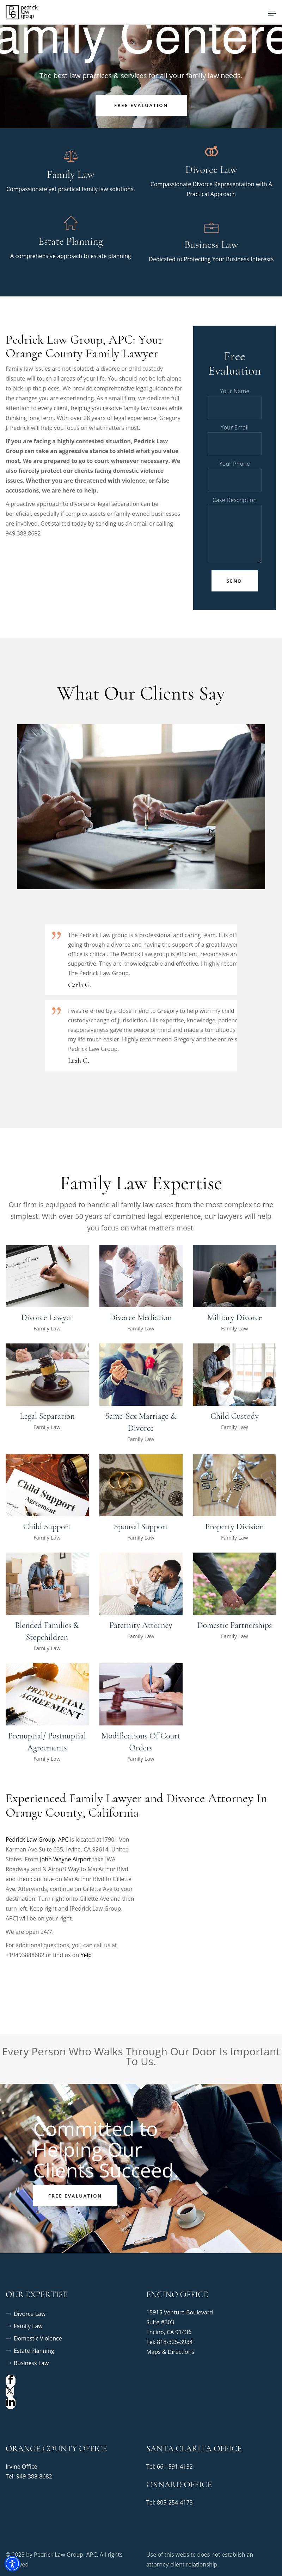 The Law Offices of Gregory J. Pedrick - Encino CA Lawyers